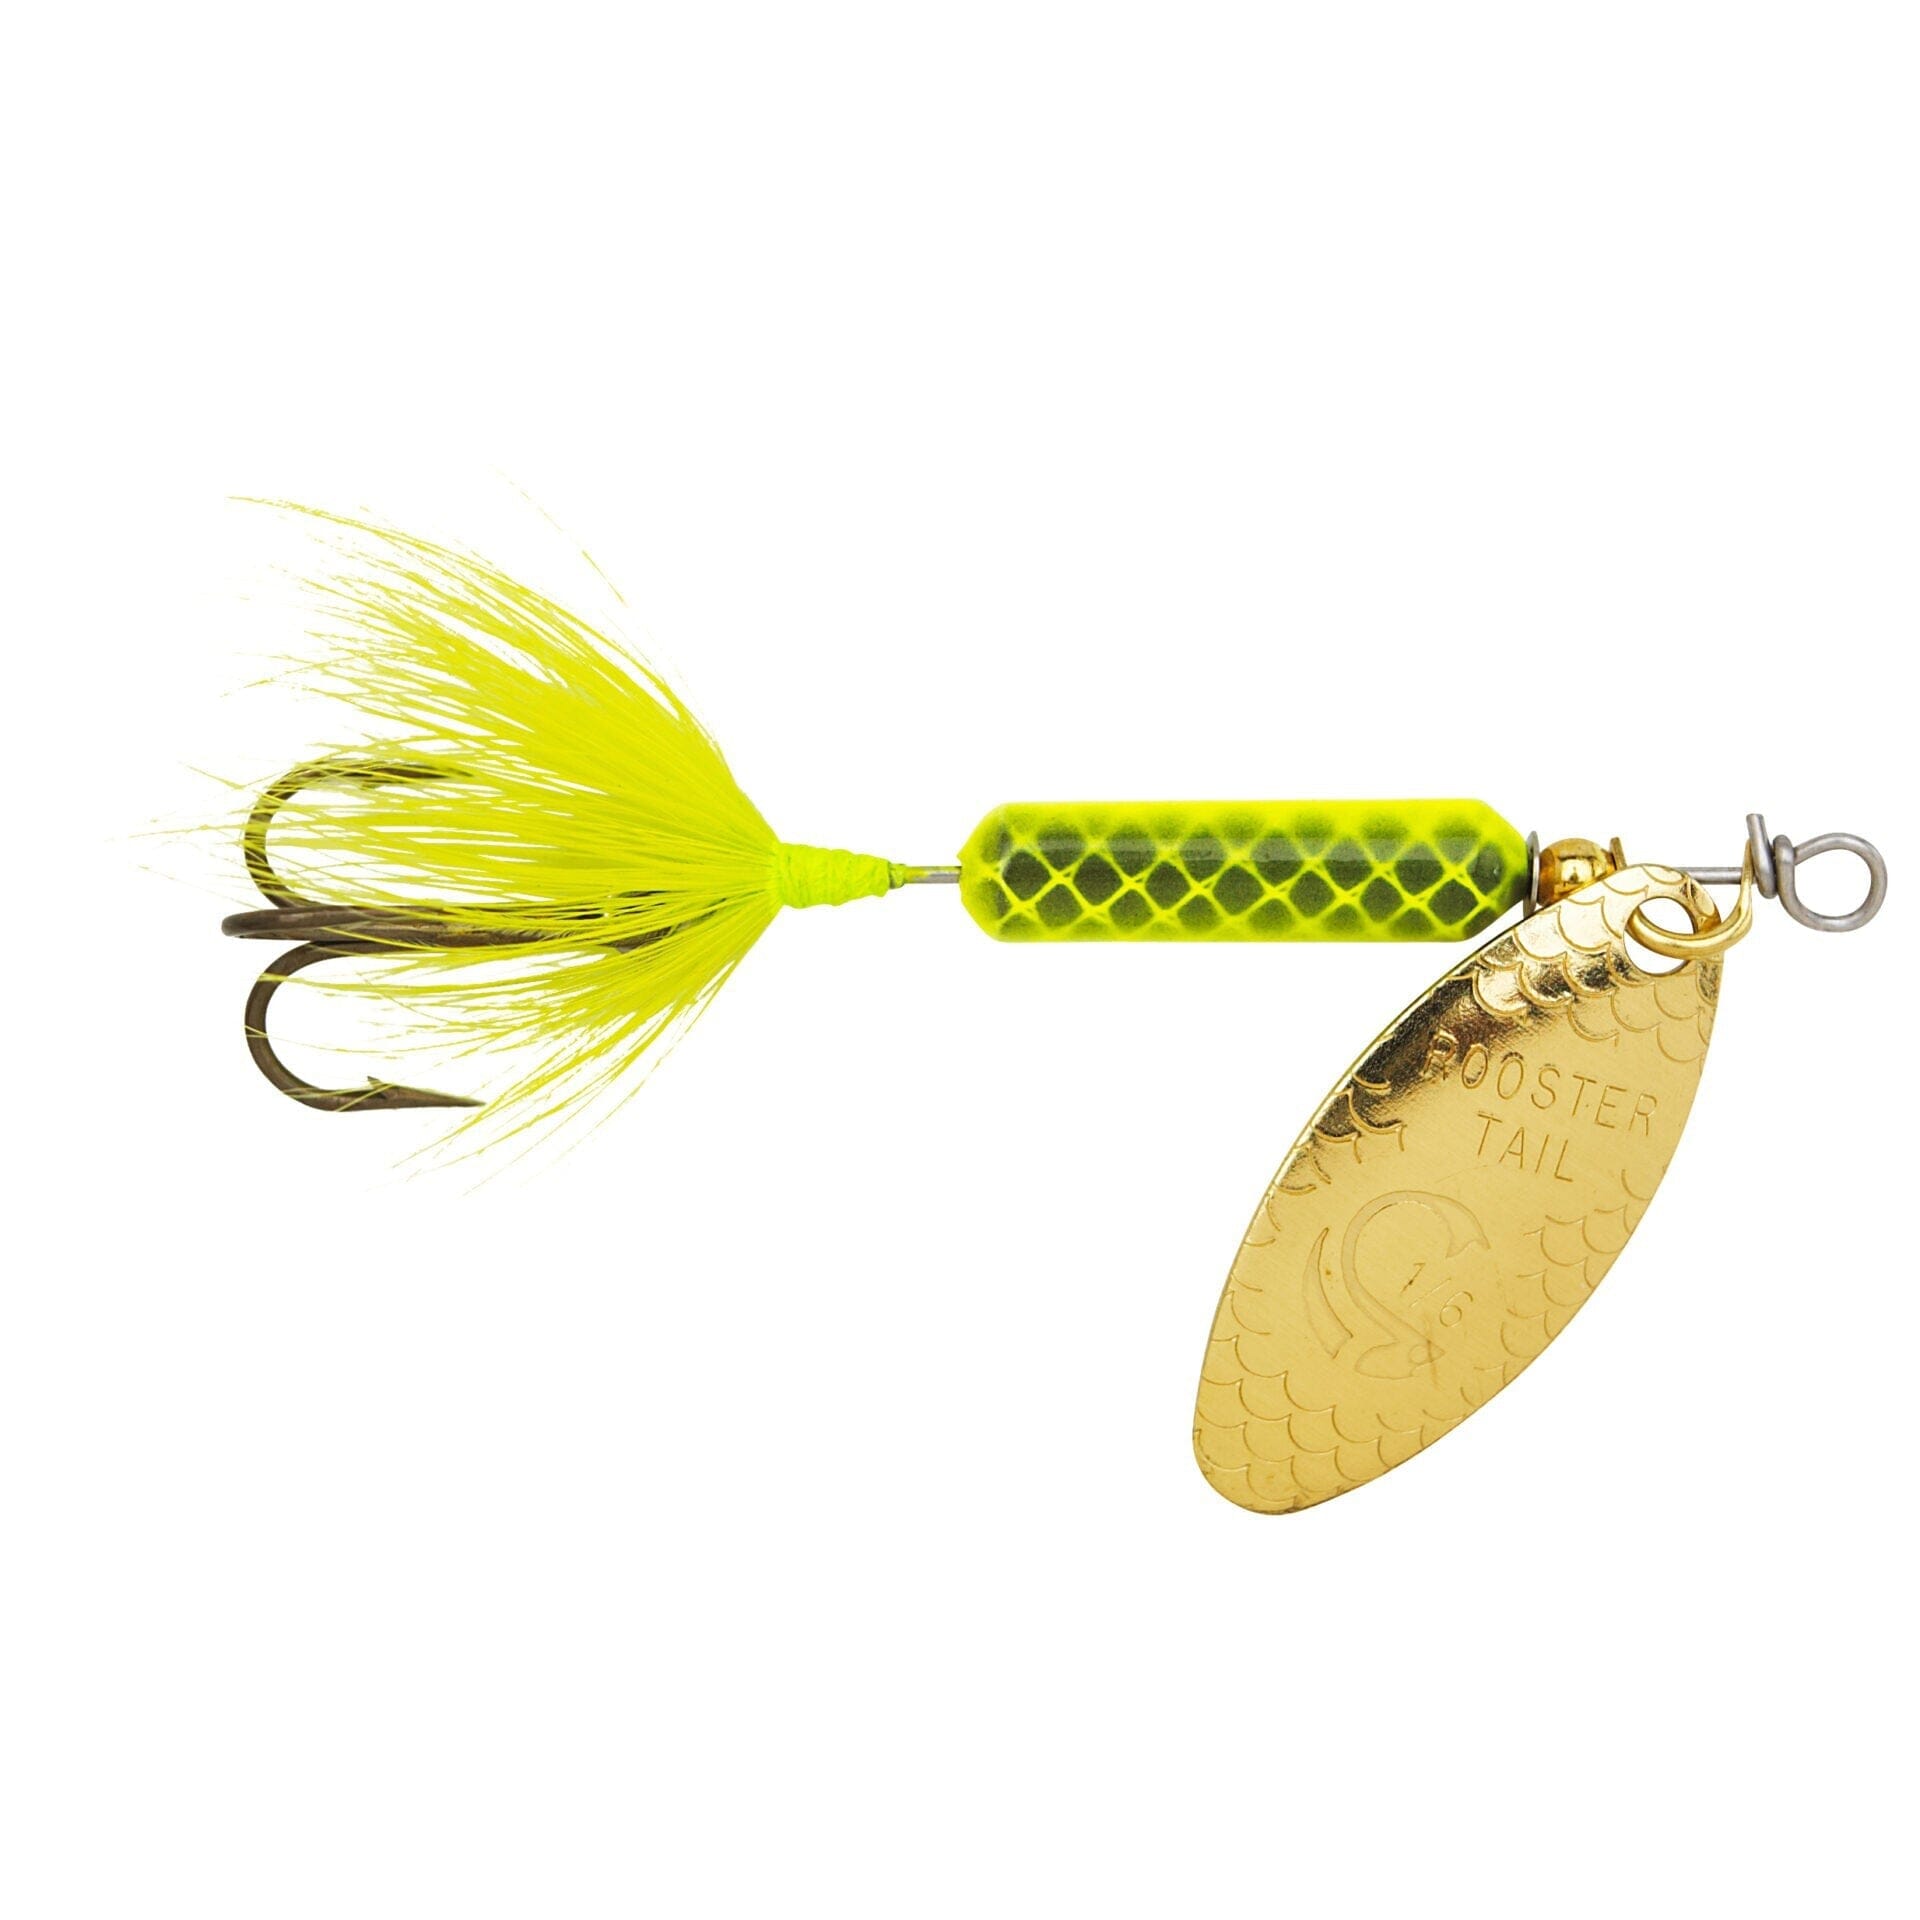 Rooster Tail Chartreuse – Hammonds Fishing